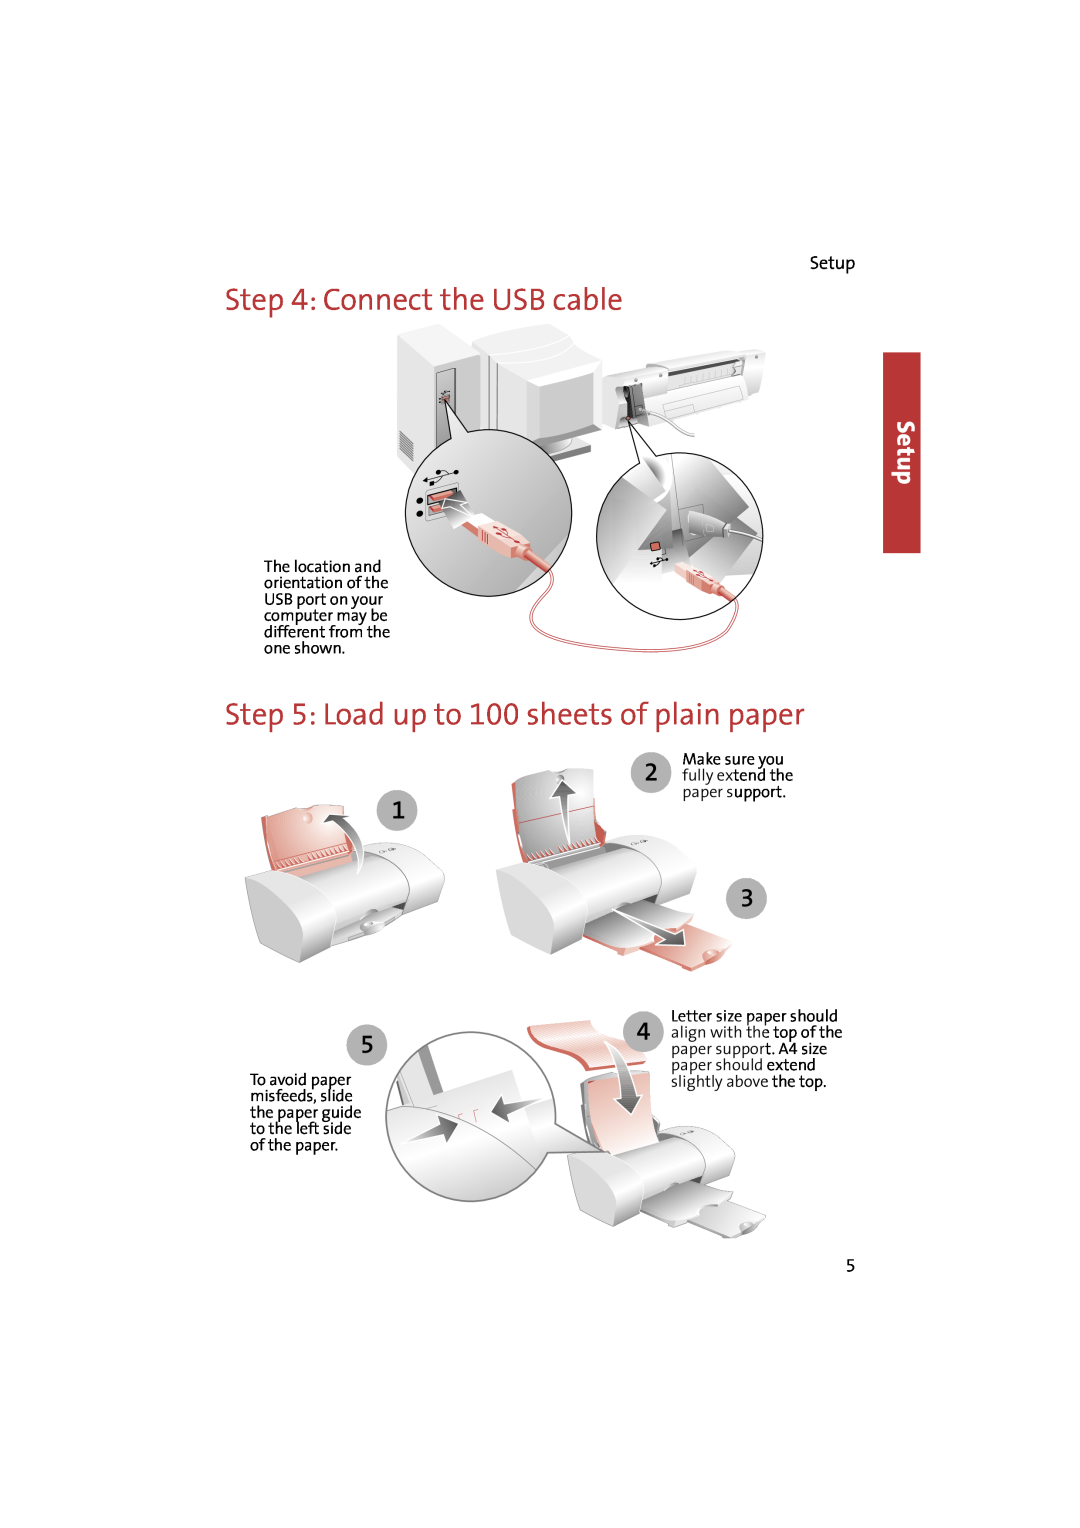 Compaq IJ650 manual Connect the USB cable, Load up to 100 sheets of plain paper, Setup 